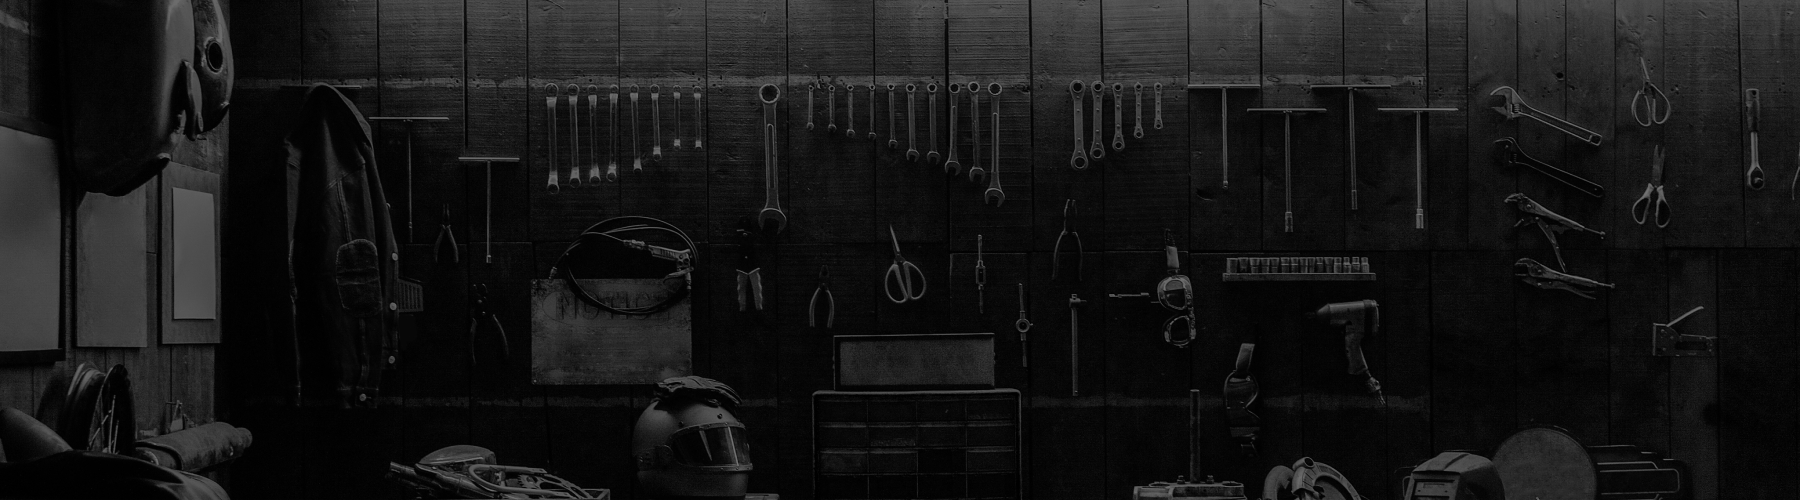 leatherman garage with tools on the wall